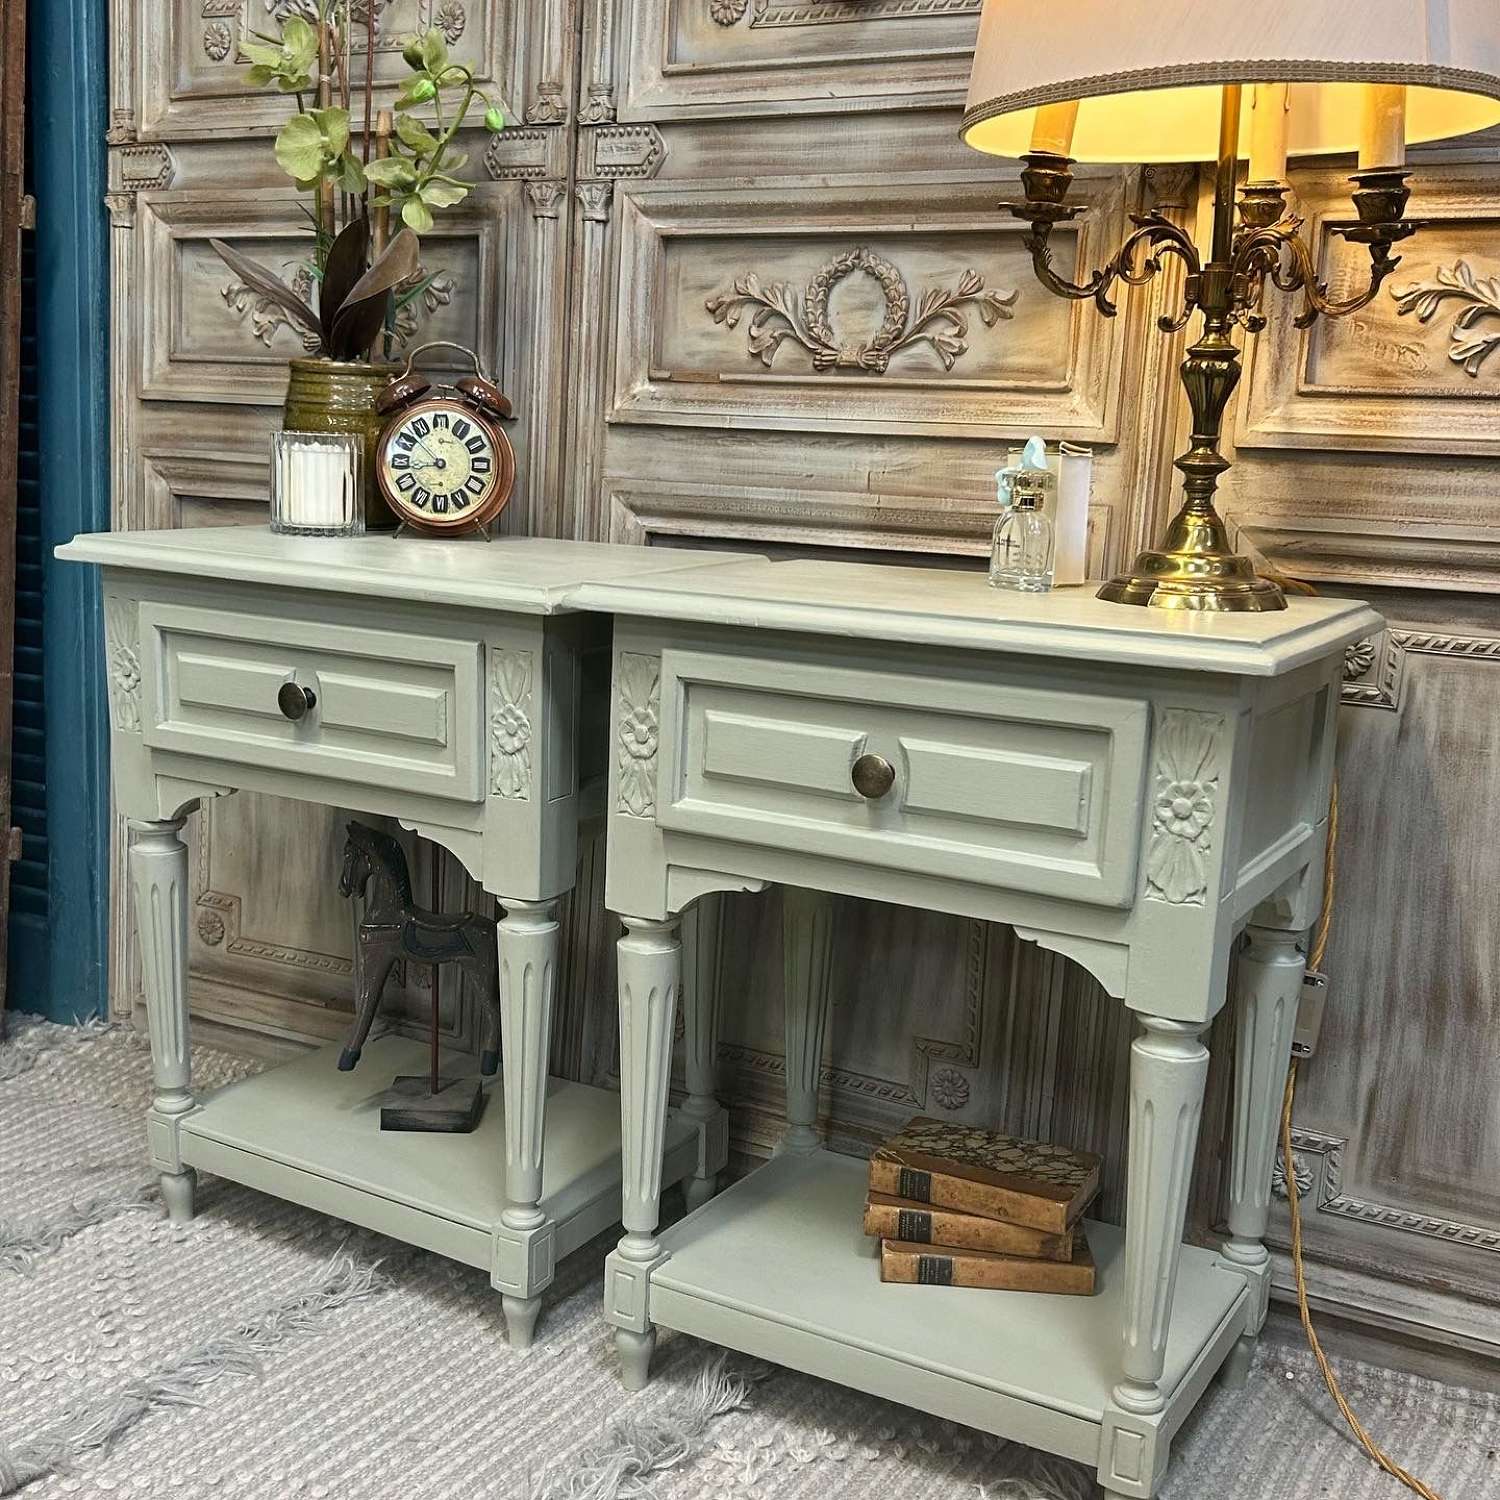 Pair of French Bedside Tables painted in French Gray